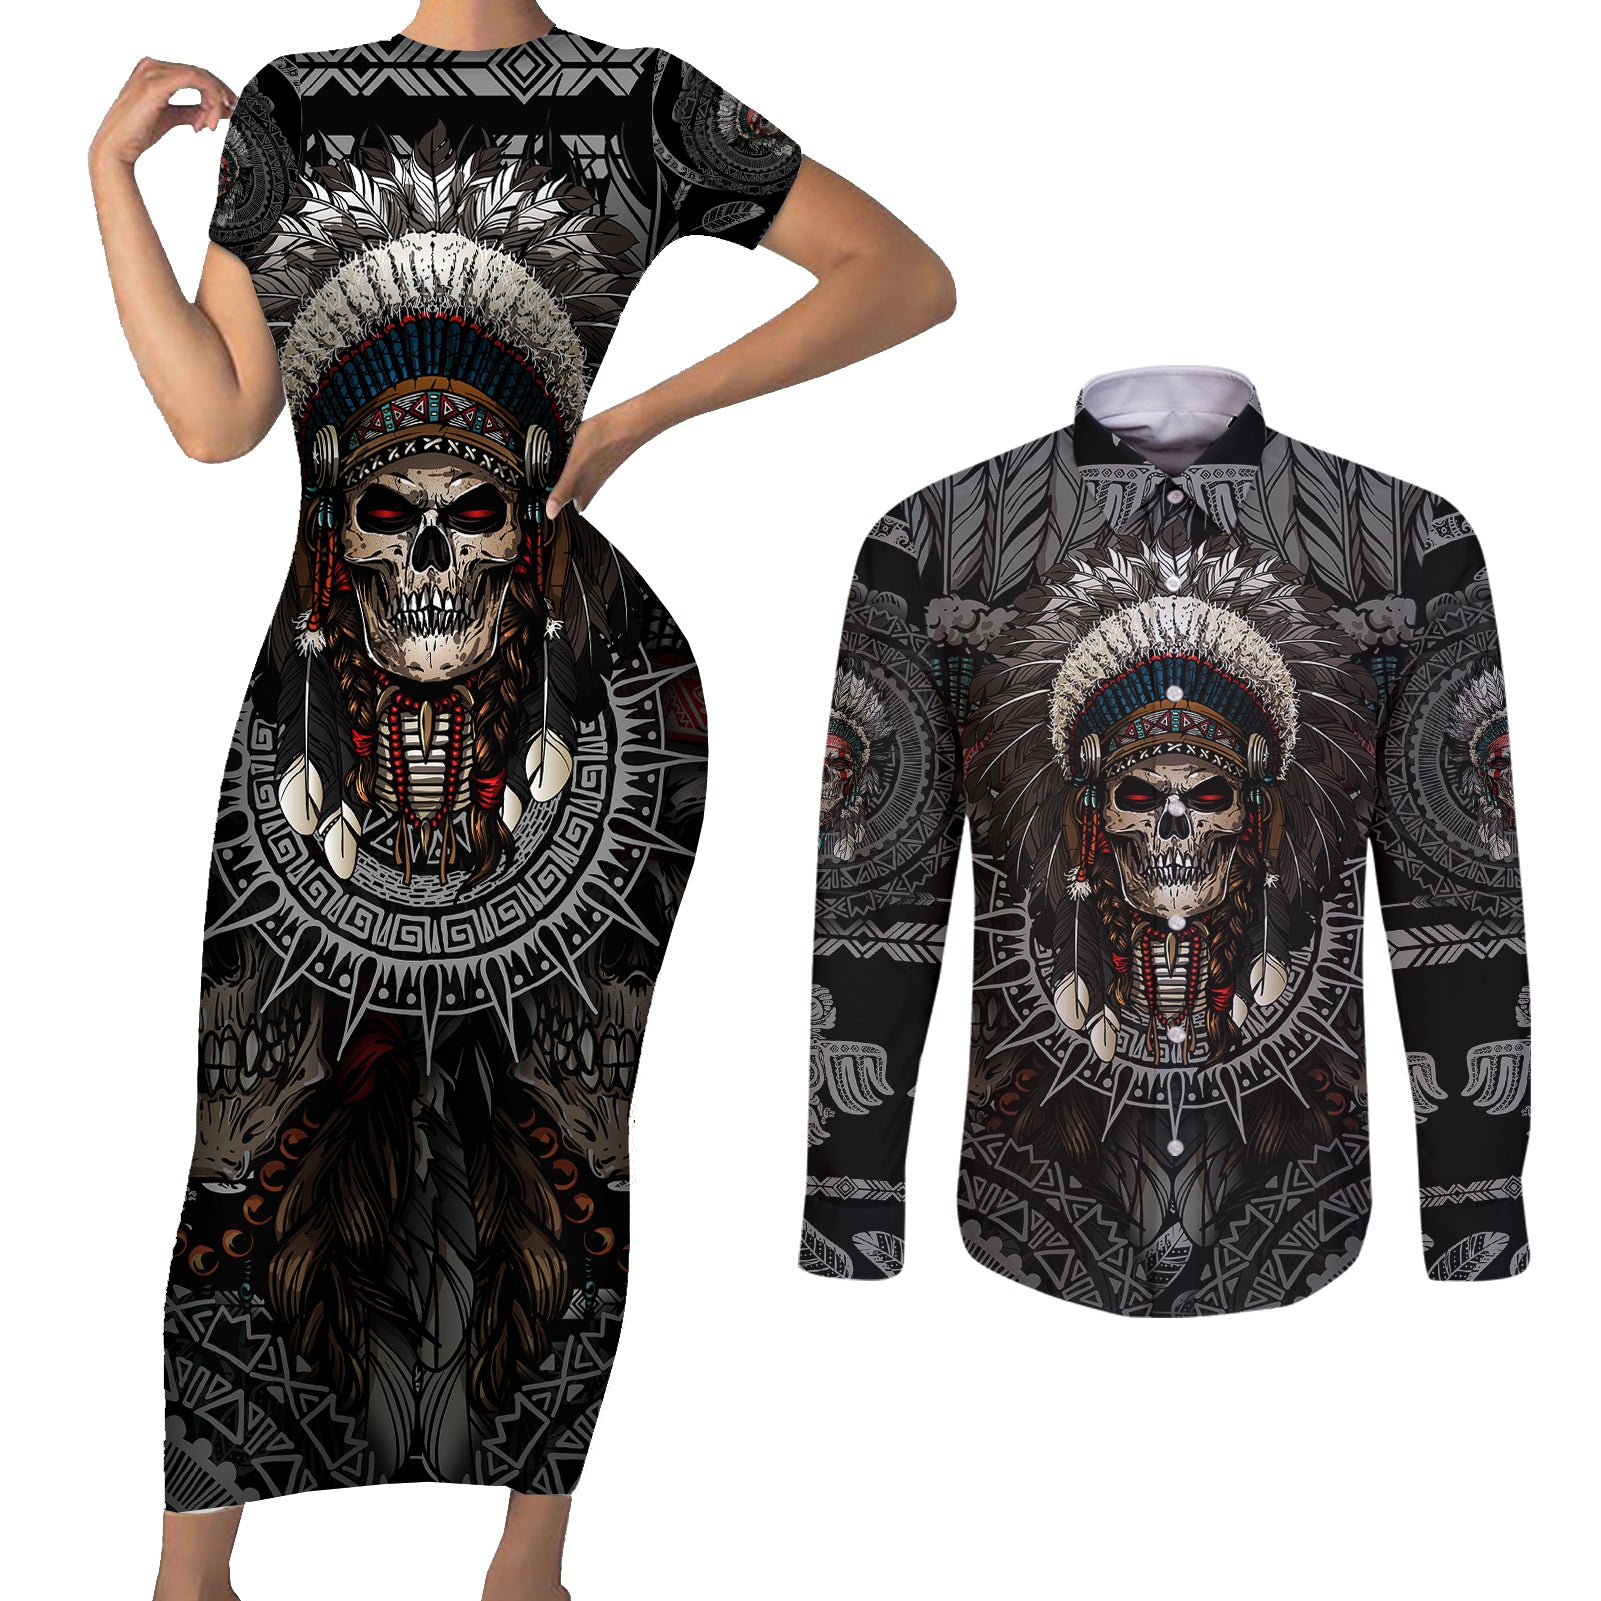 skull-native-american-warrior-couples-matching-short-sleeve-bodycon-dress-and-long-sleeve-button-shirts